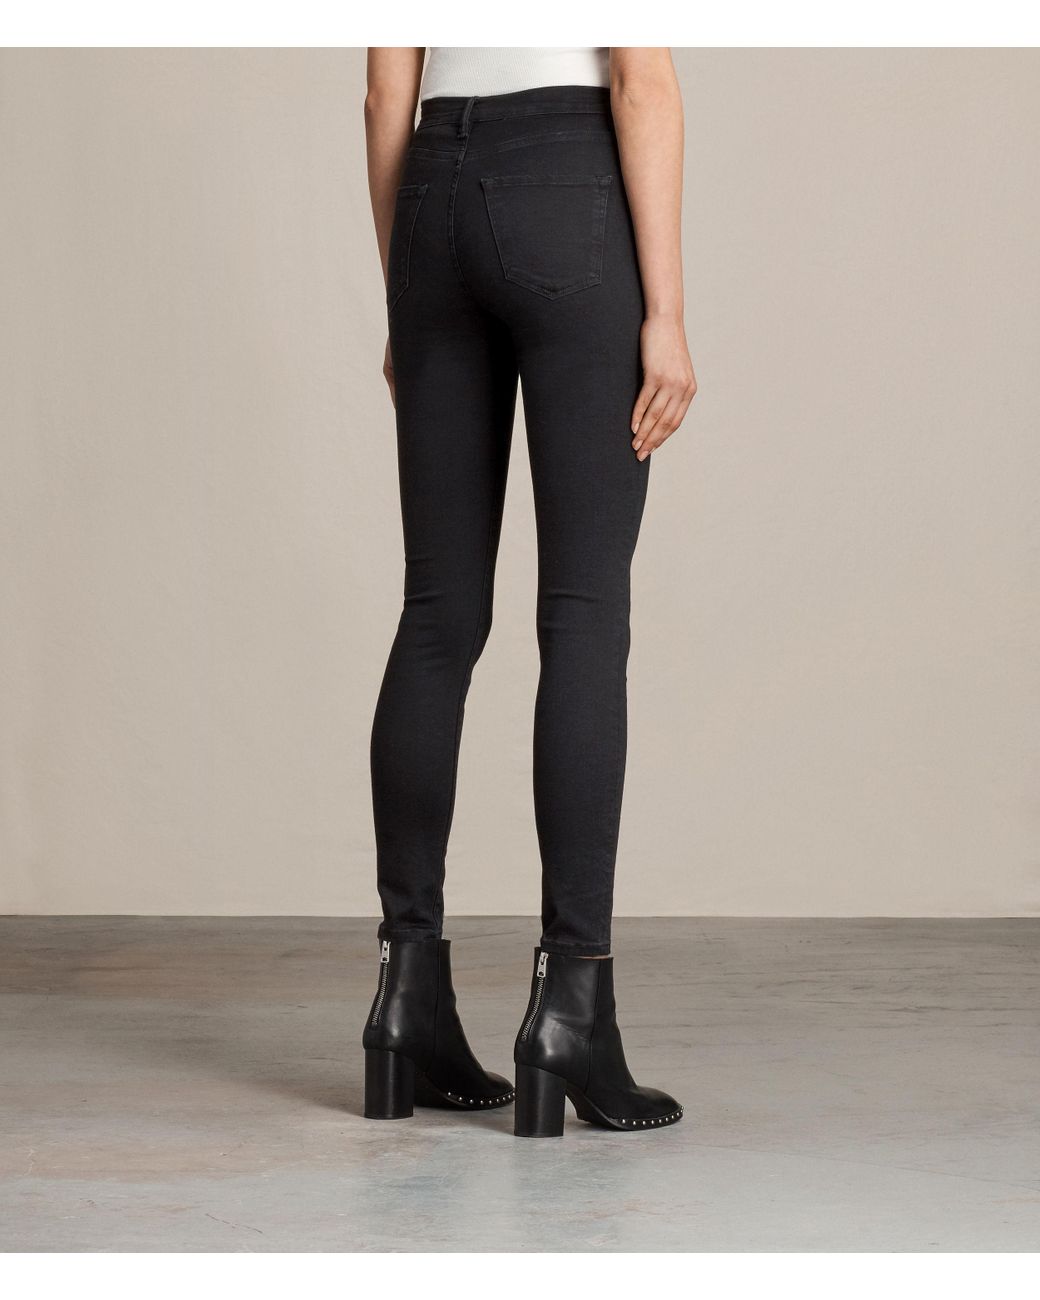 AllSaints Eve Lux Jeans in Black | Lyst